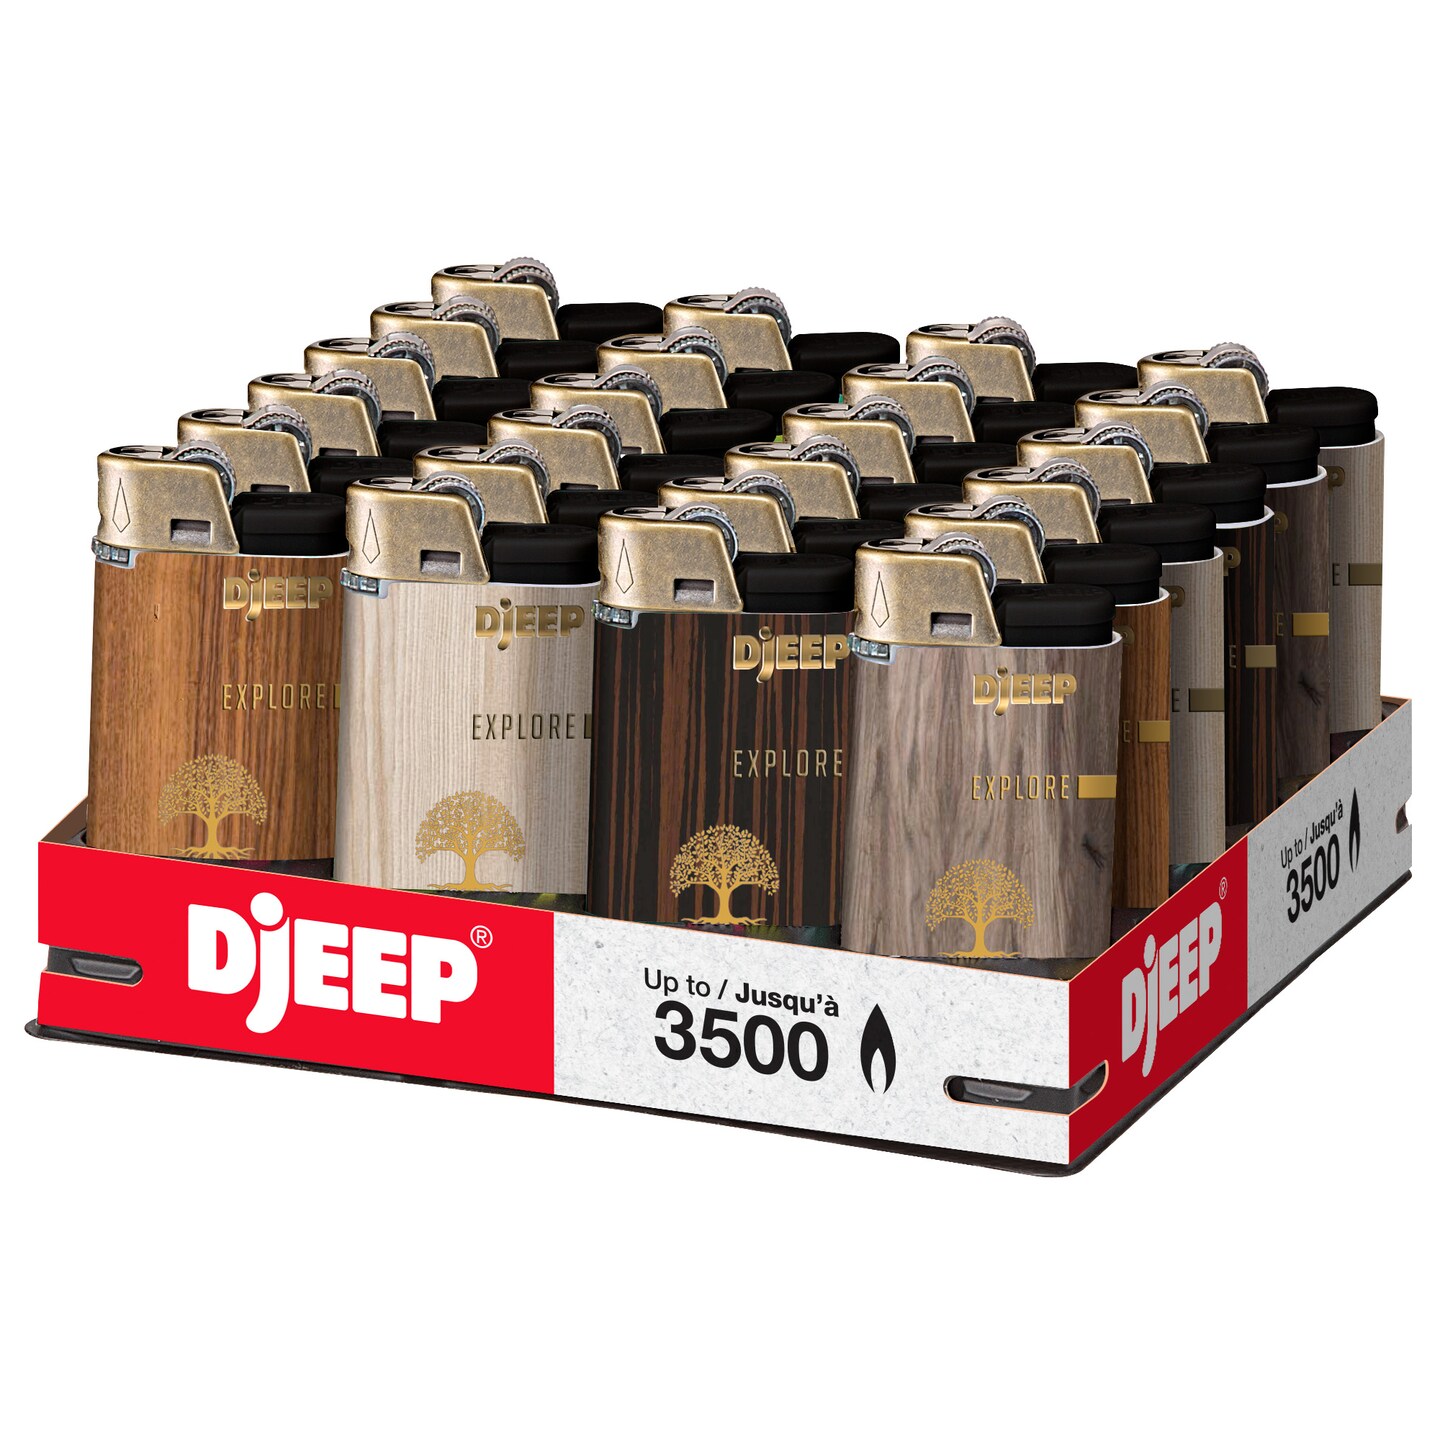 DJEEP Pocket Lighters, BOLD Collection Textured Metallic, Unique Lighters, Disposable Lighters